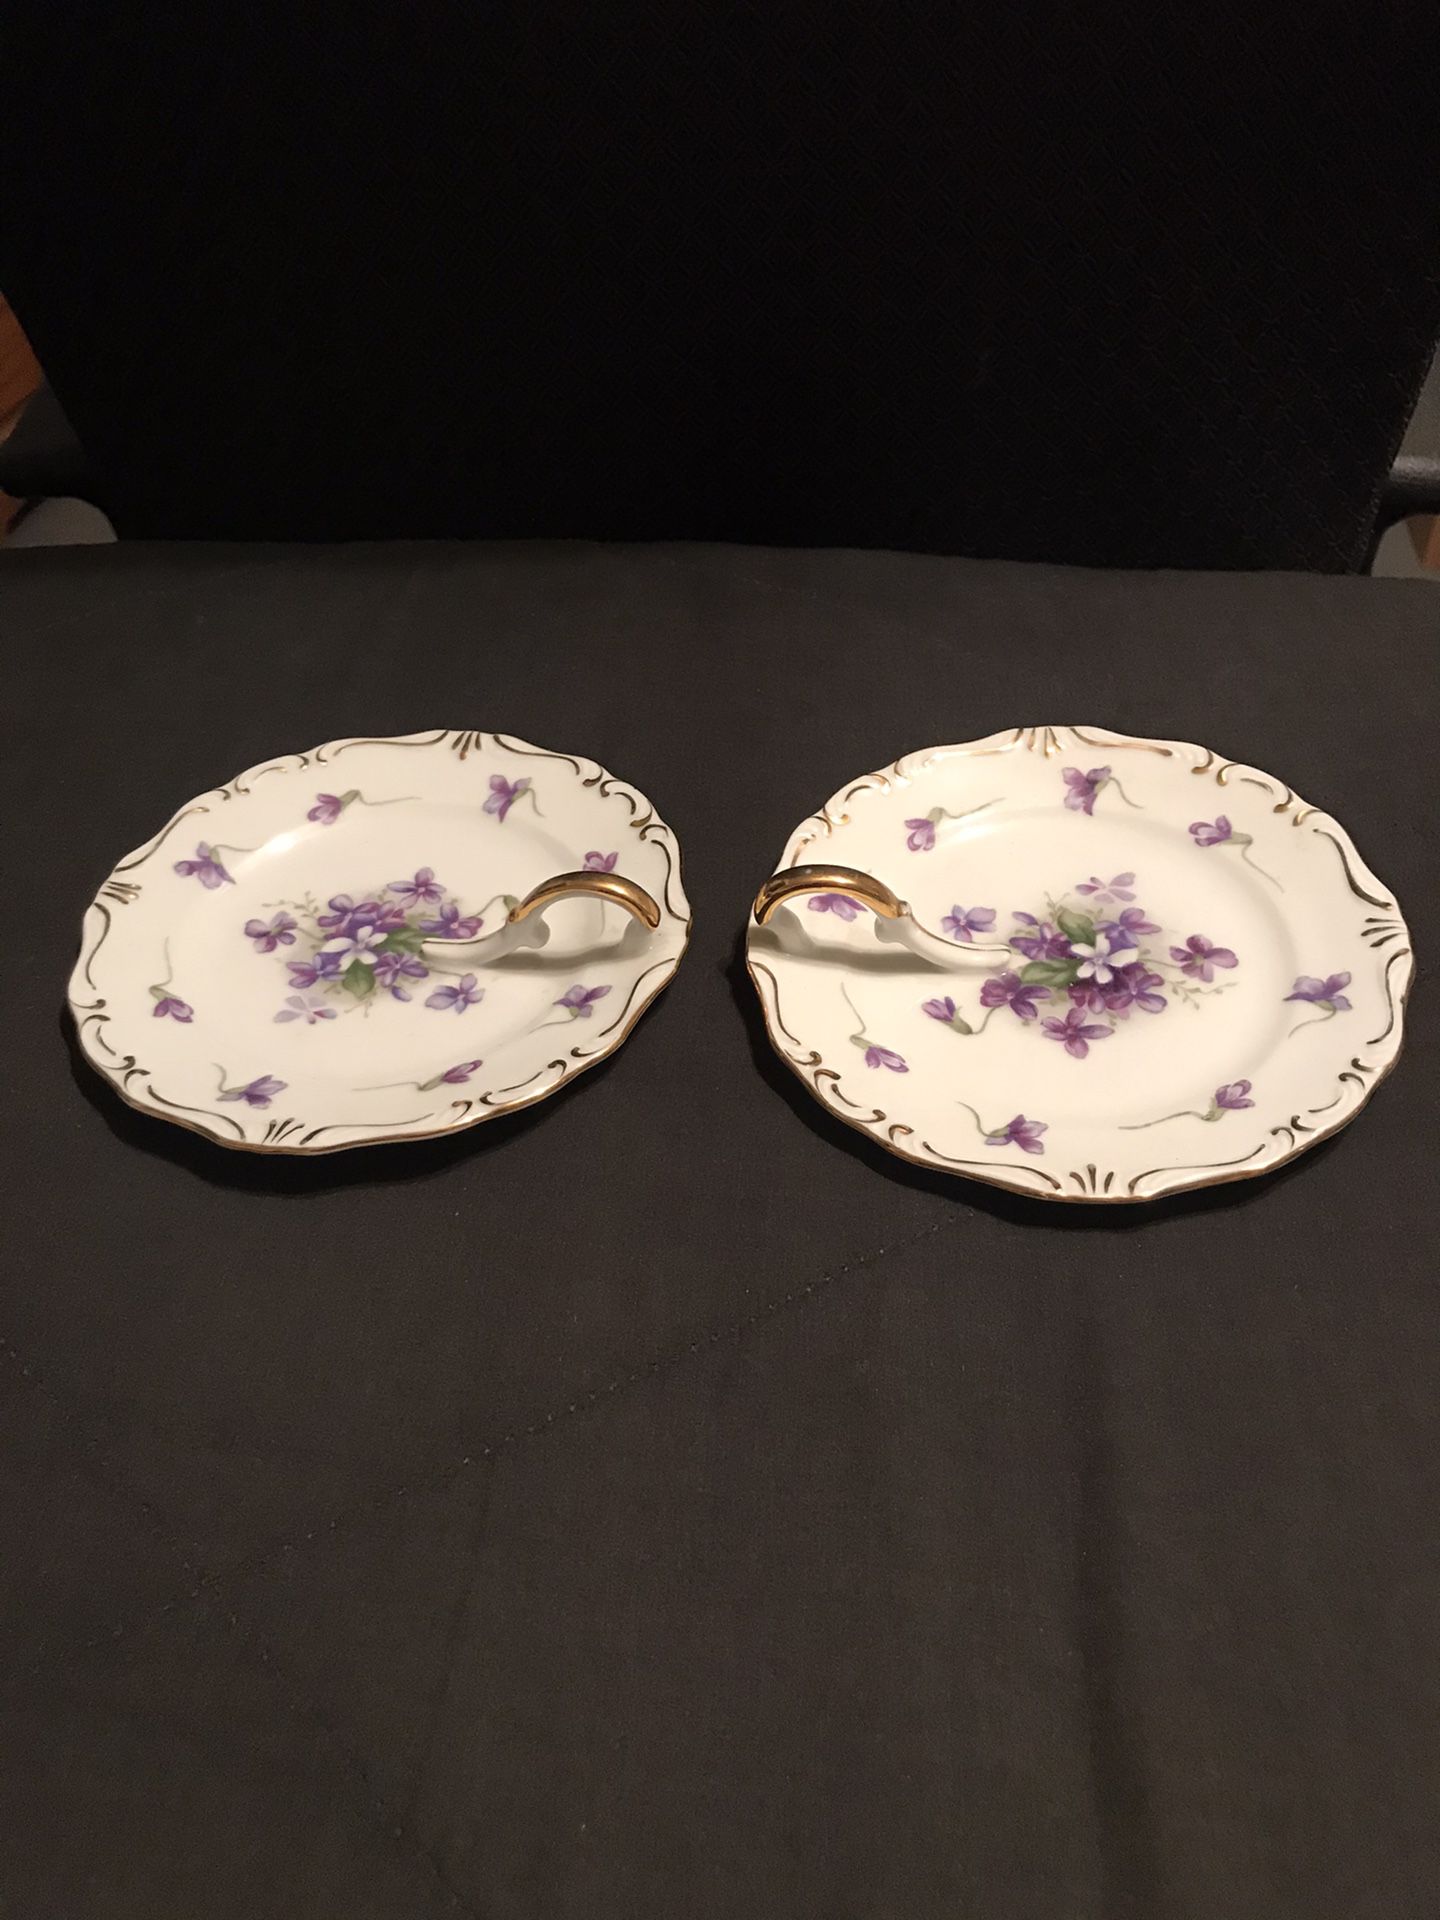 2 Vintage Rossetti Spring Violets Lemon Dishes Hand Painted Occupied Japan